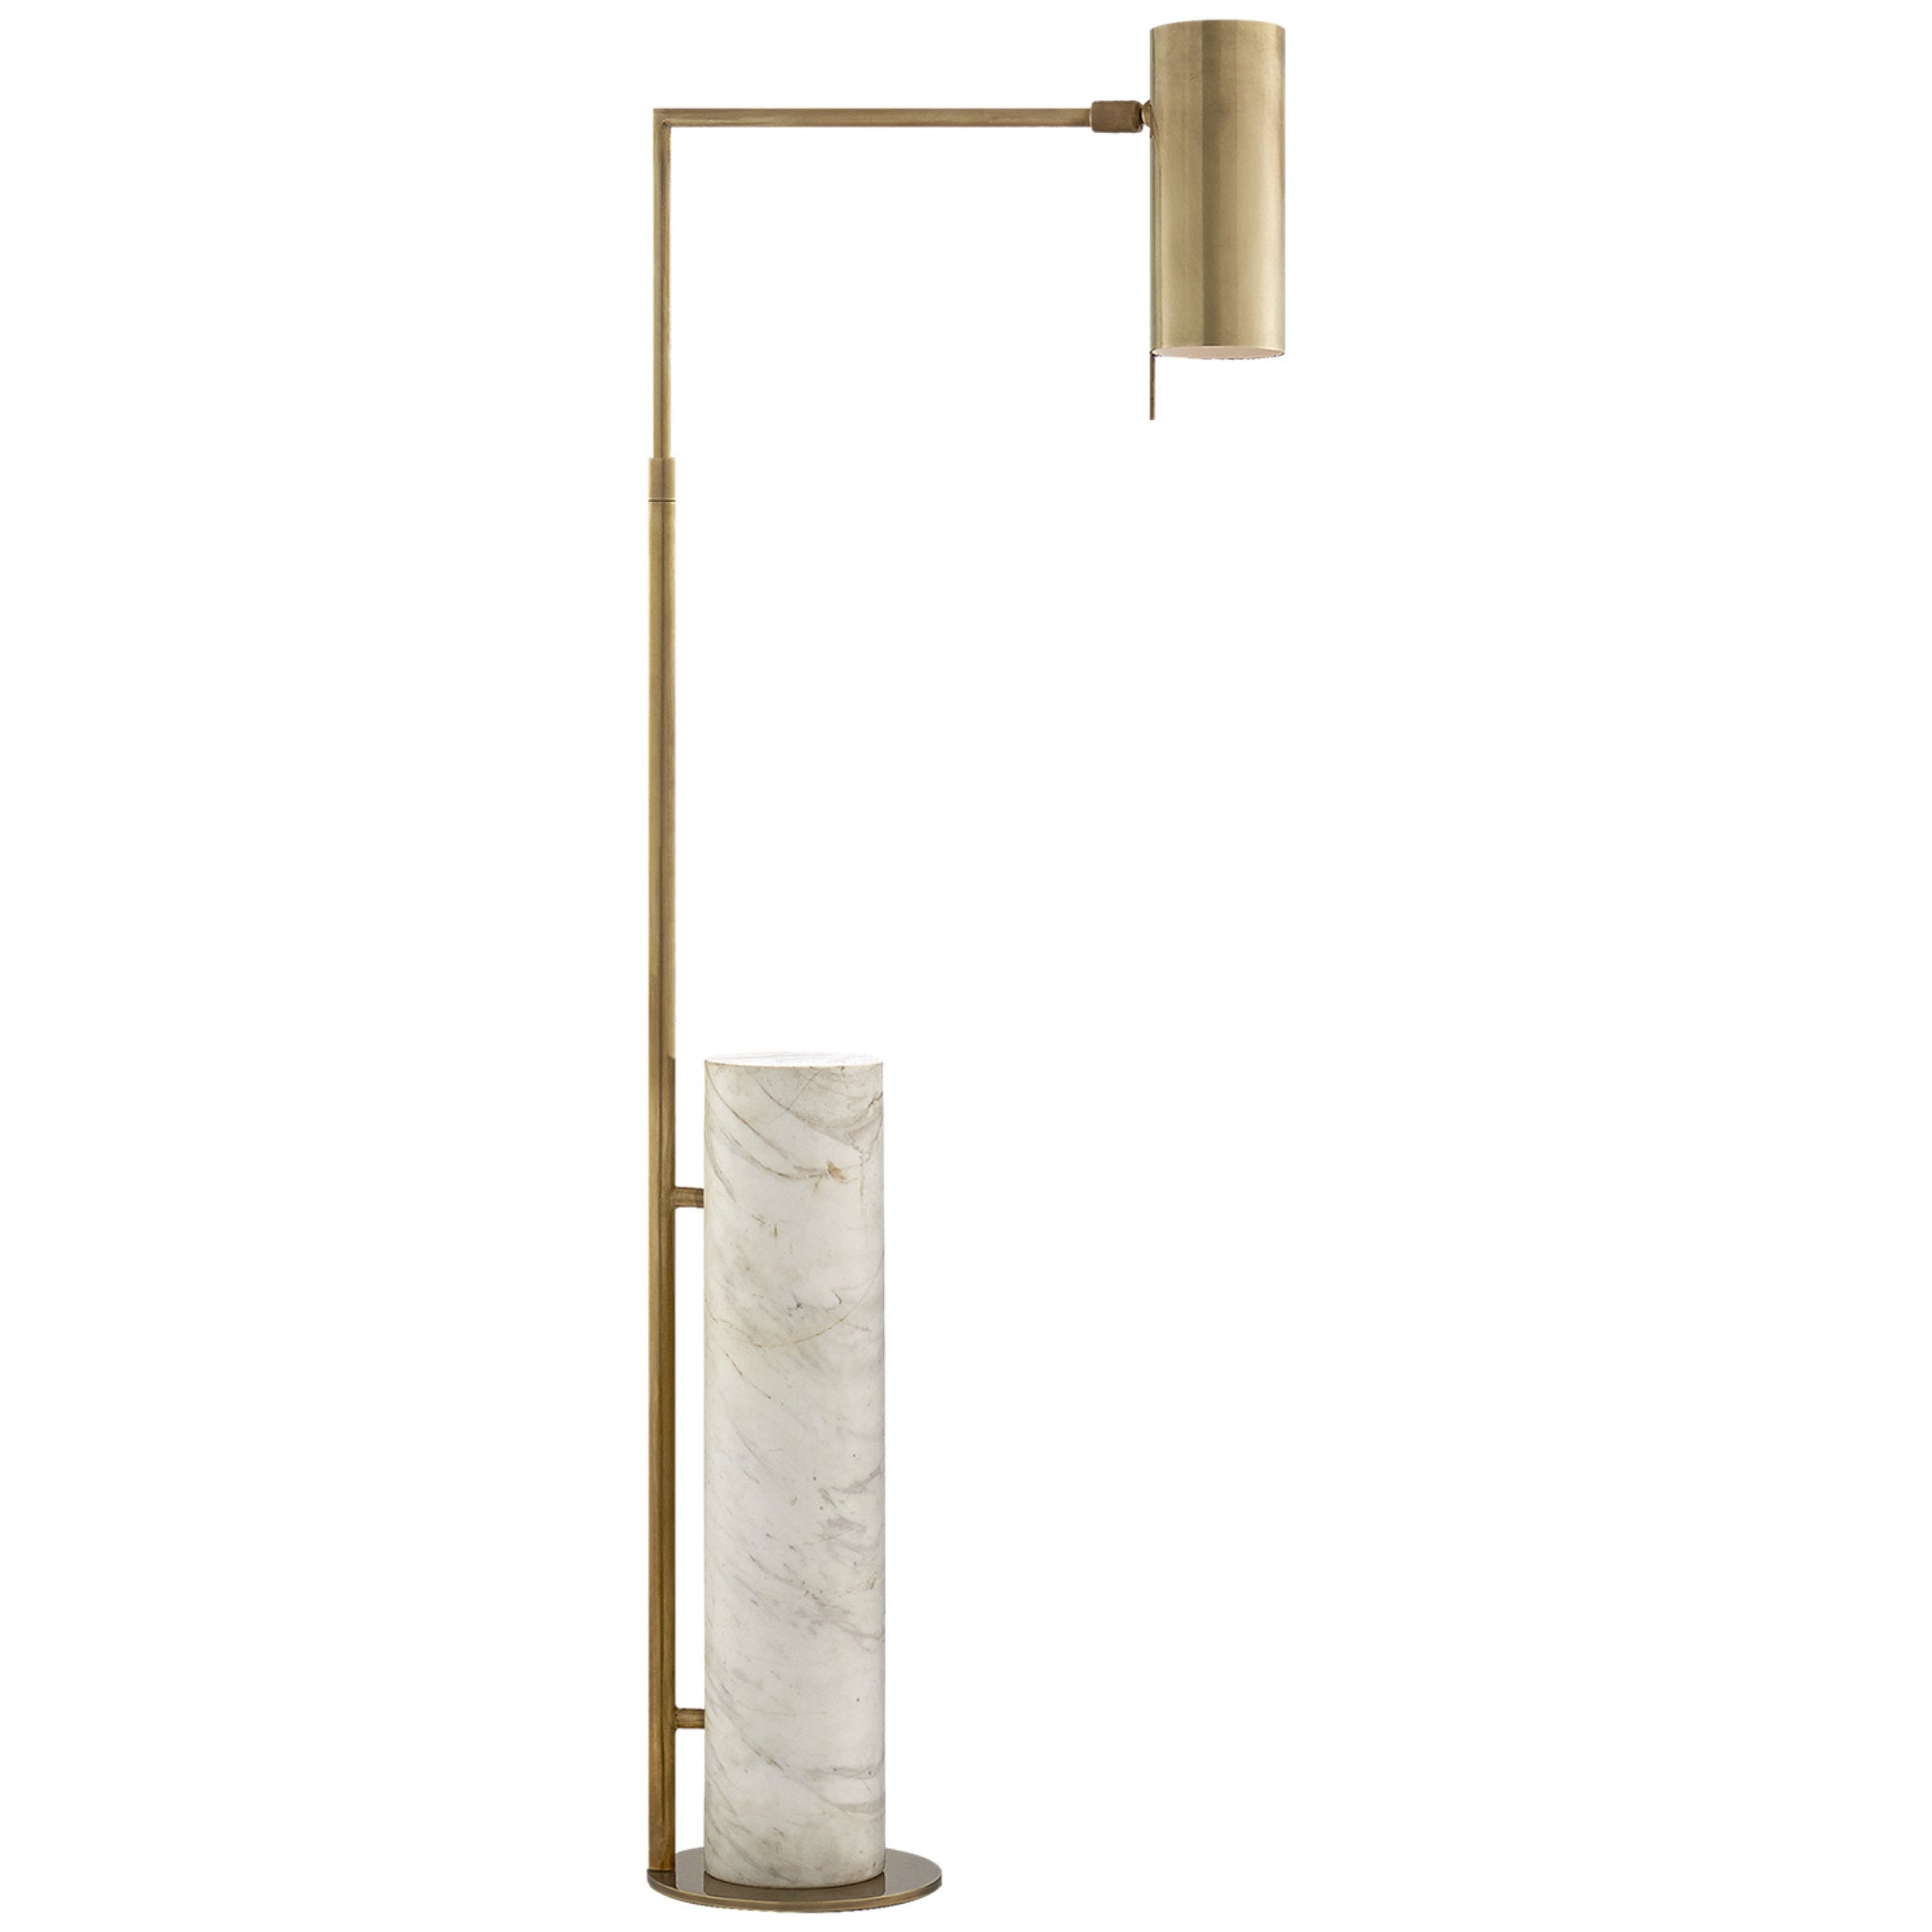 Kelly Wearstler Alma Floor Lamp in Antique-Burnished Brass and White Marble